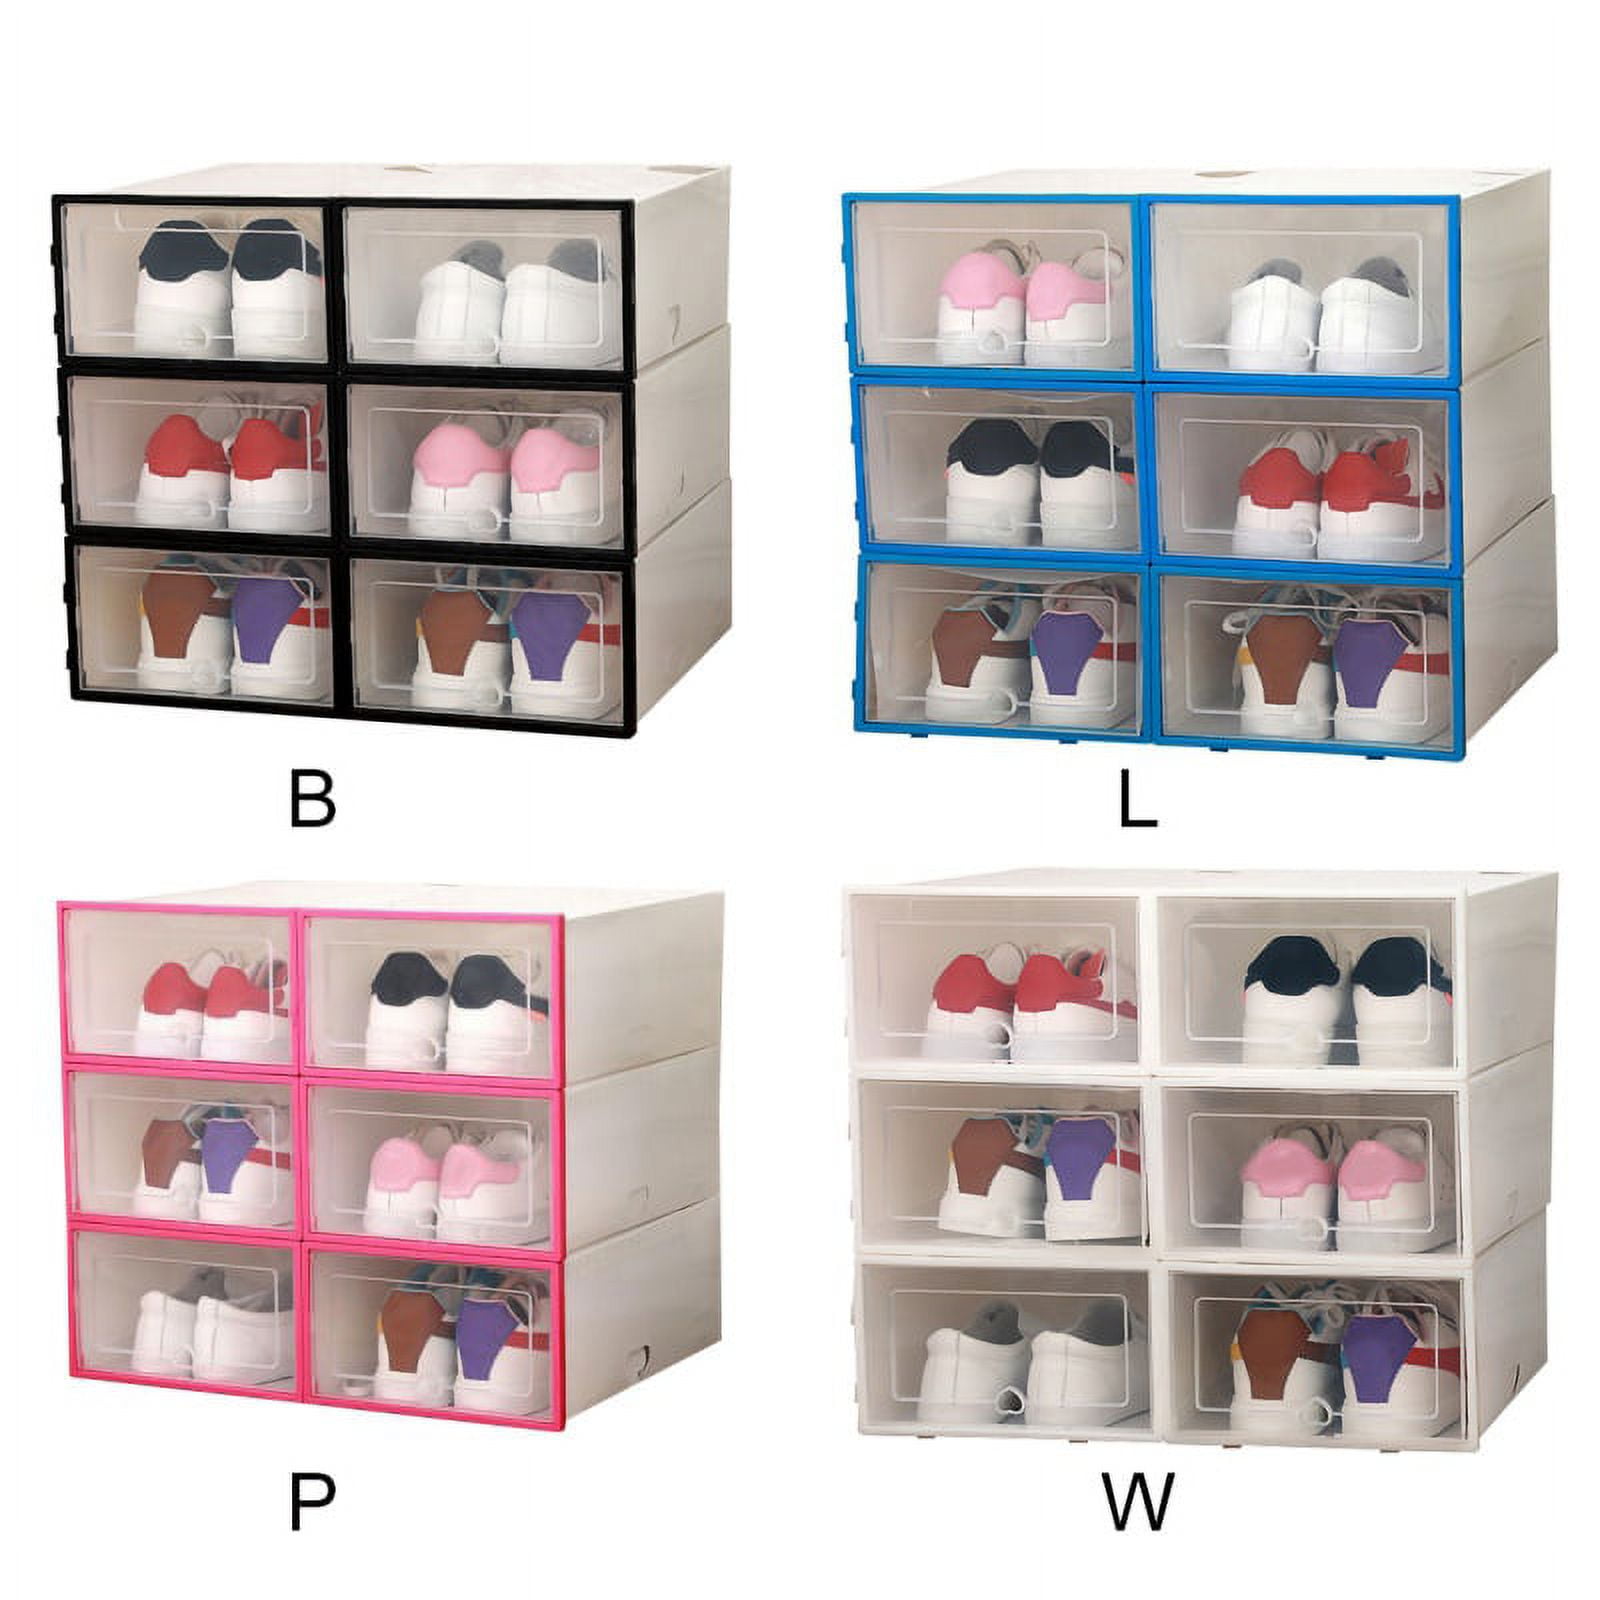 Topwoner 1pc Foldable Plastic Shoes Box Transparent Household Storage Drawer Organizer DIY Divider Clear Stackable Shoe Organizer Bins, Drawer Type Front